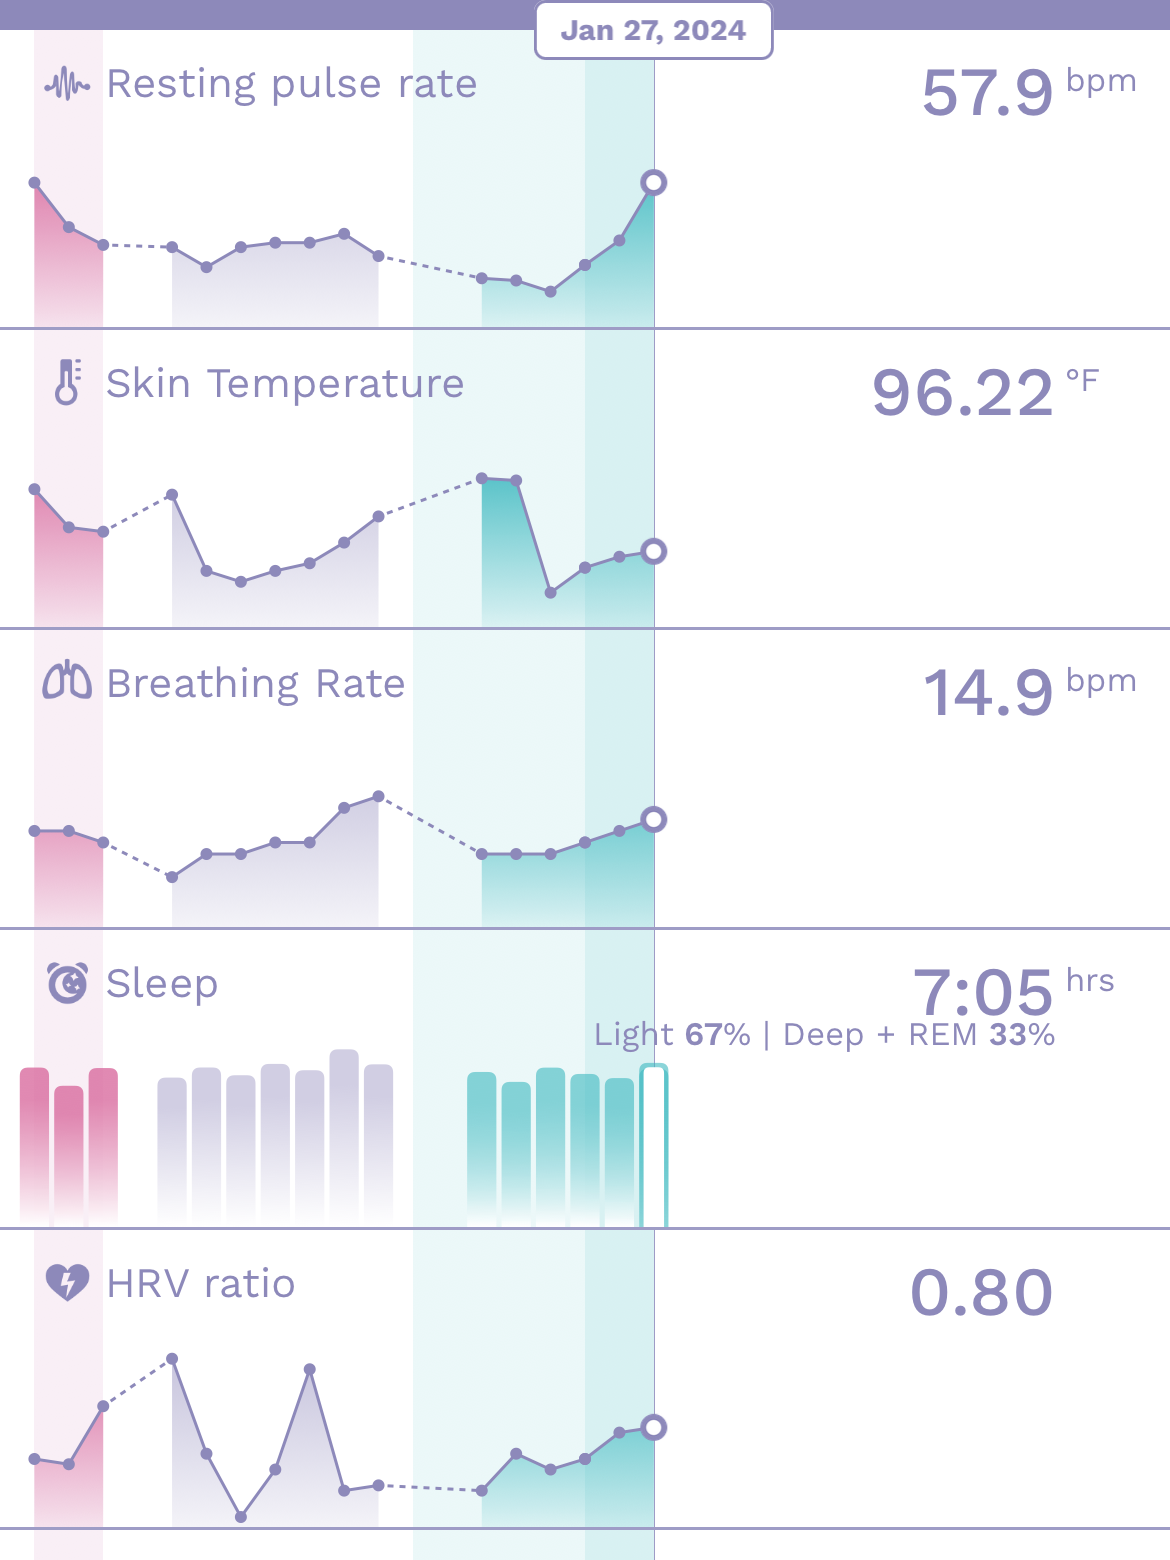 A screenshot of a health tracking mobile application showing various health statistics such as resting pulse rate, skin temperature, breathing rate, sleep quality, heart rate variability (hrv), and daily light exposure.